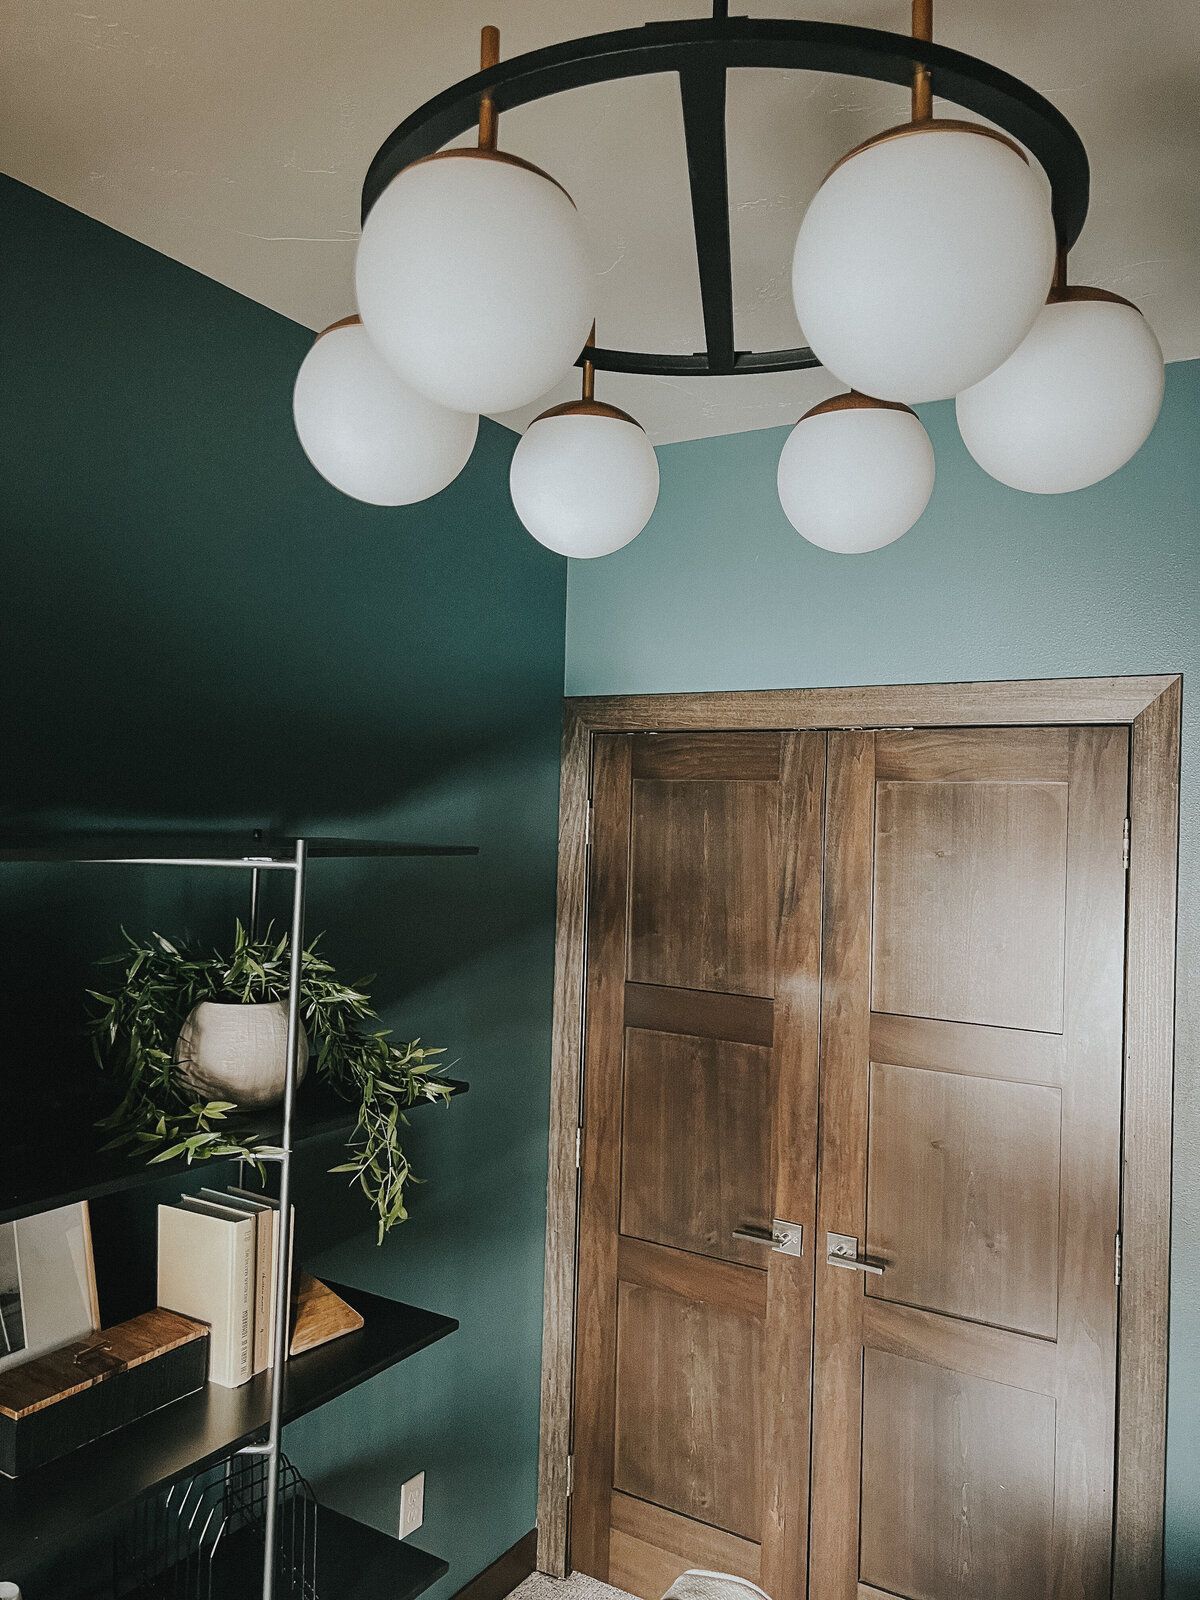 A round light fixture hangs from the middle of the room in a green office